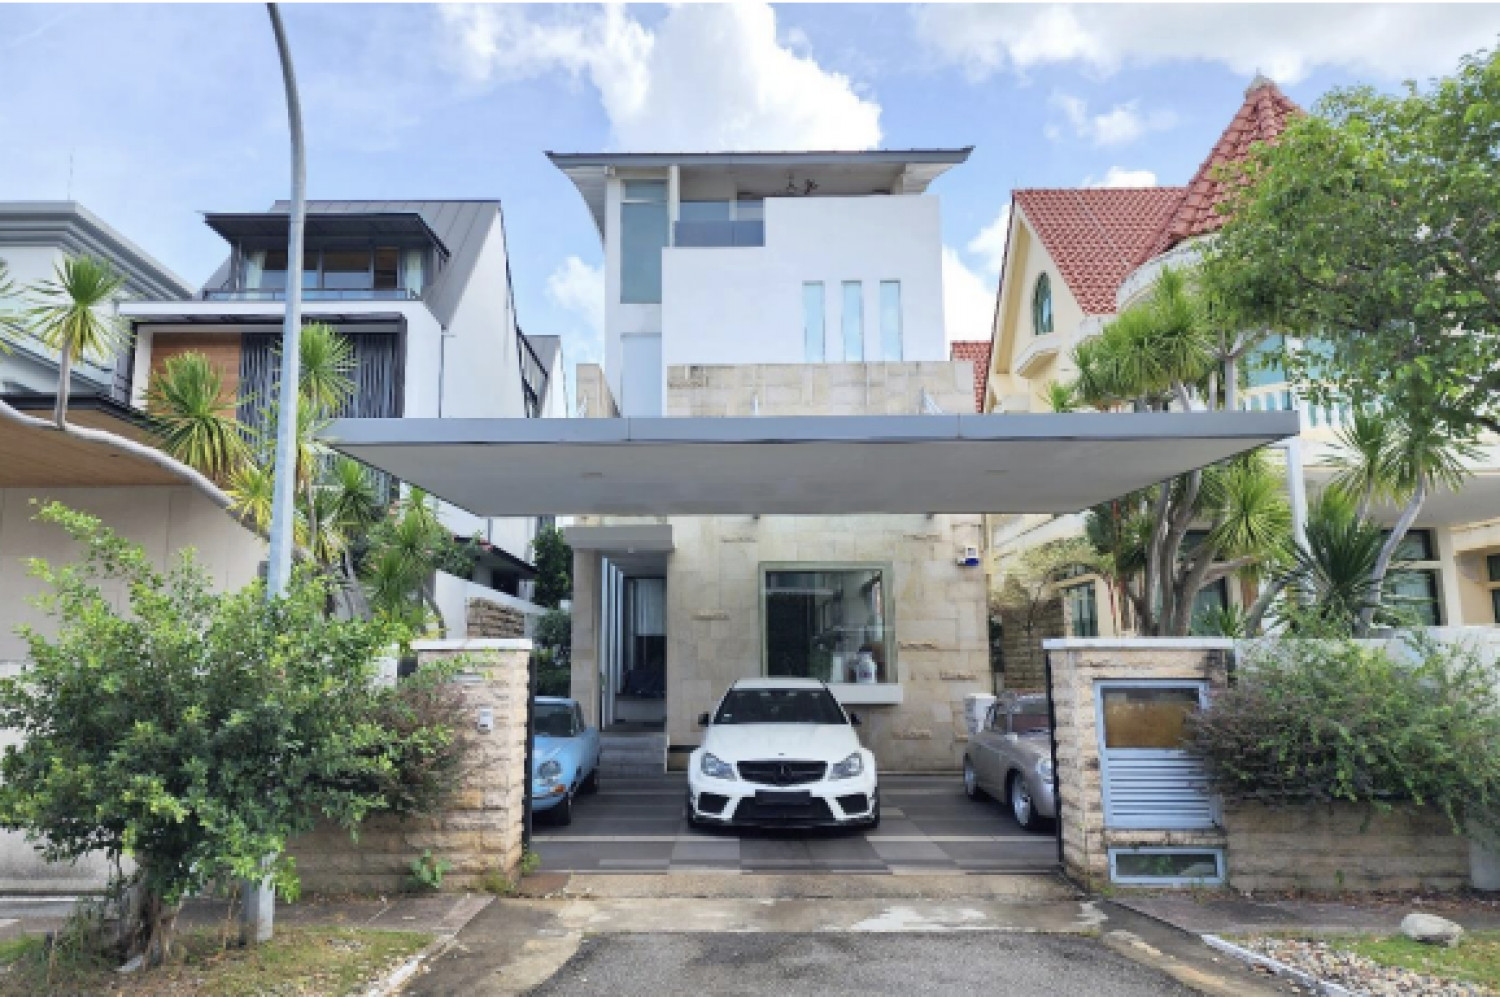 Freehold detached house at Branksome Road for sale at $10.8 mil - Property News